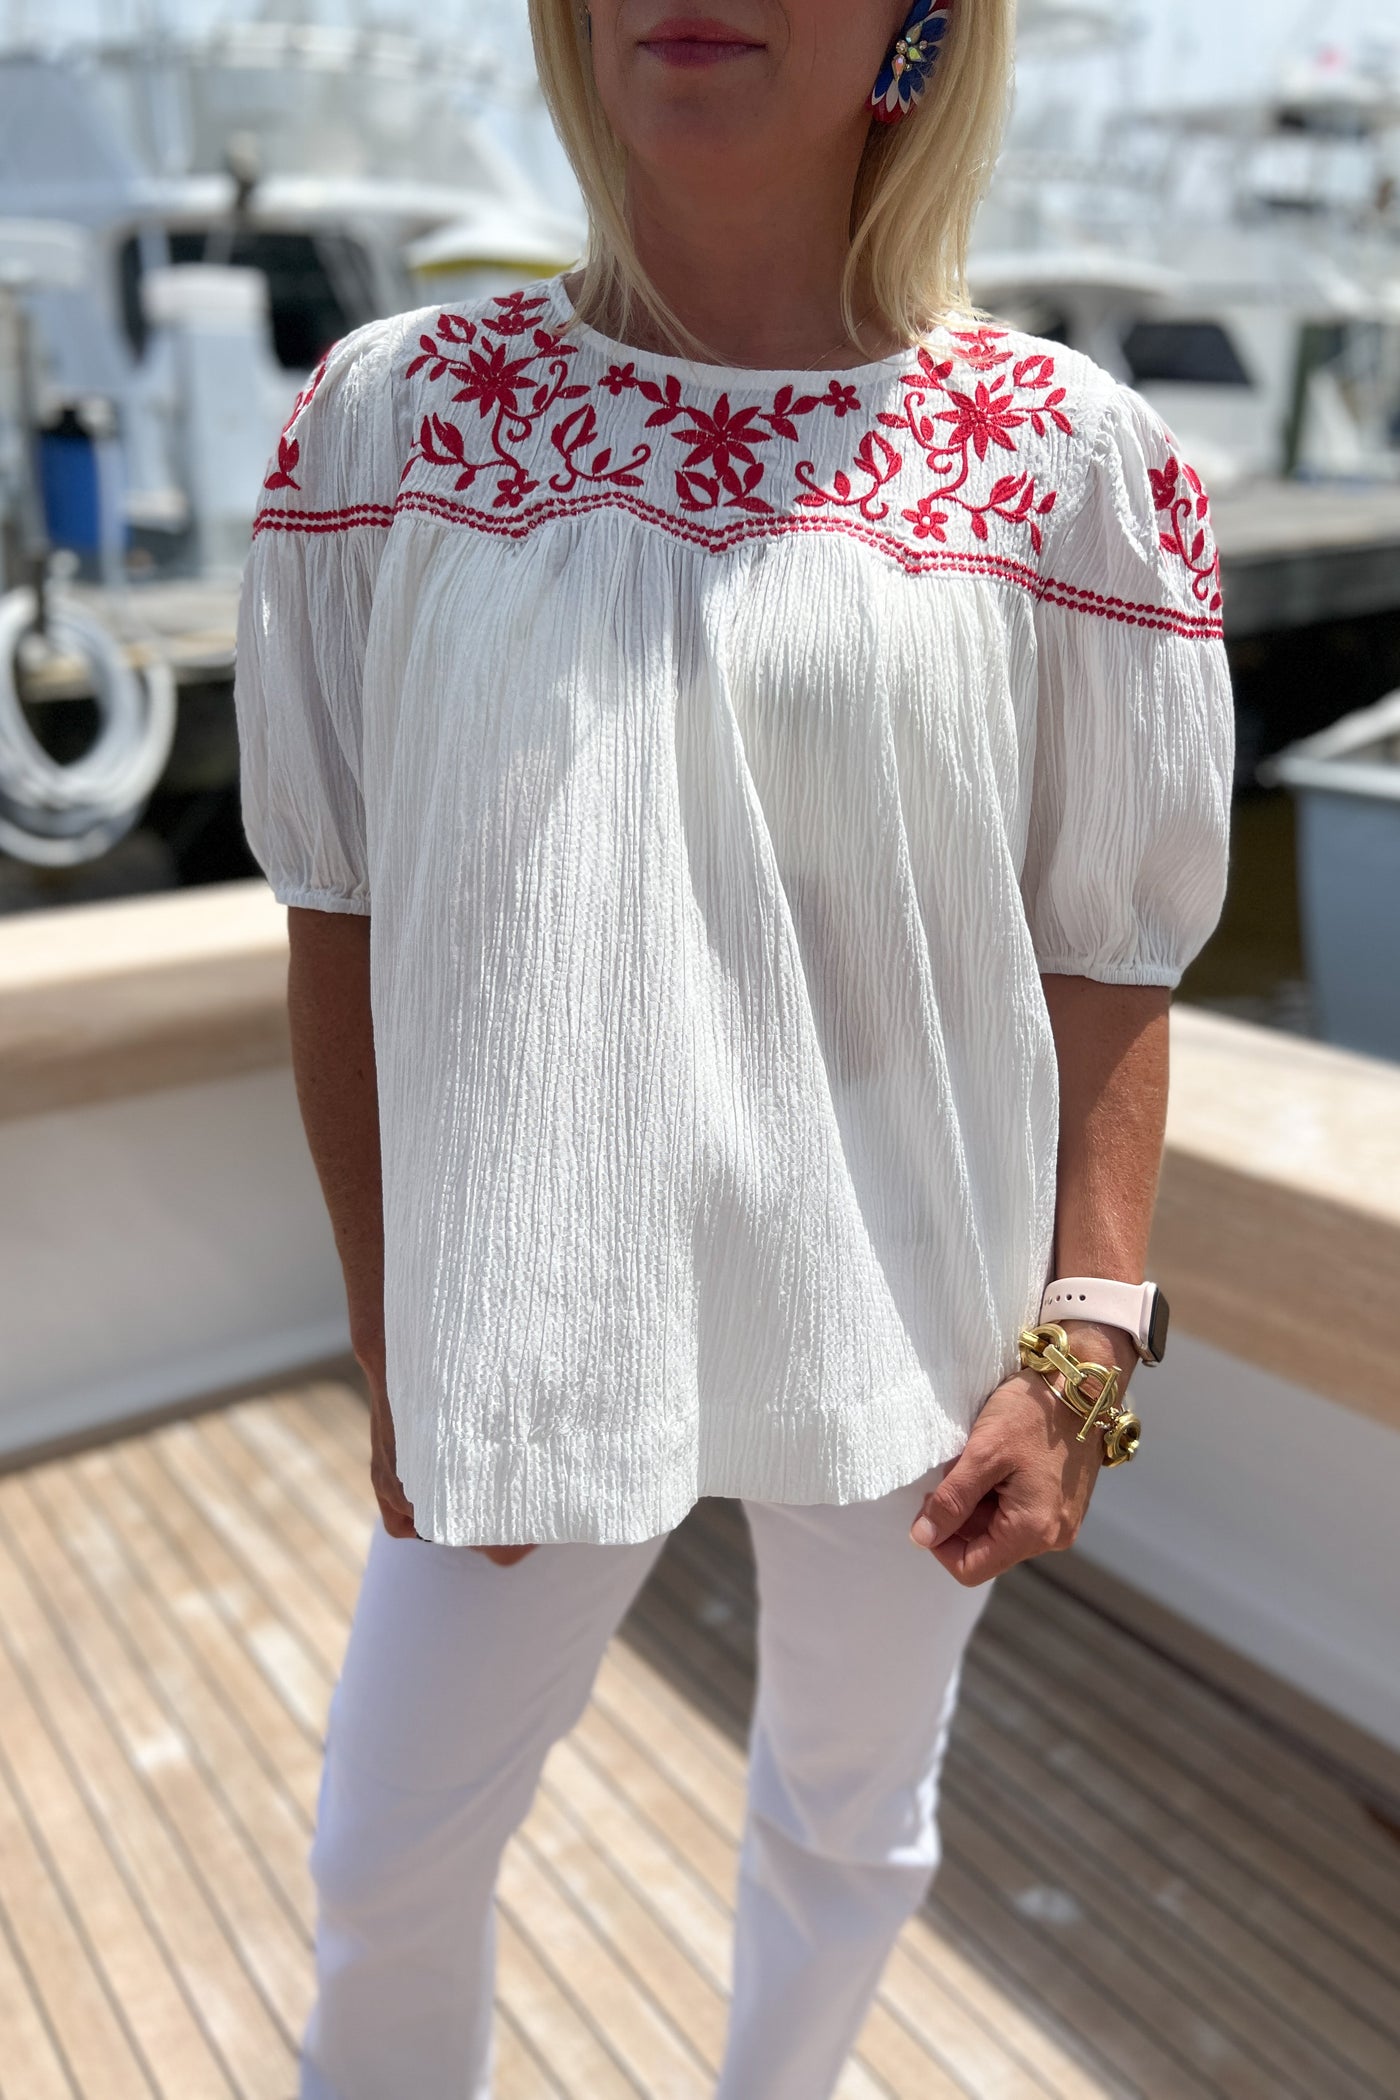 Willis embroidered top